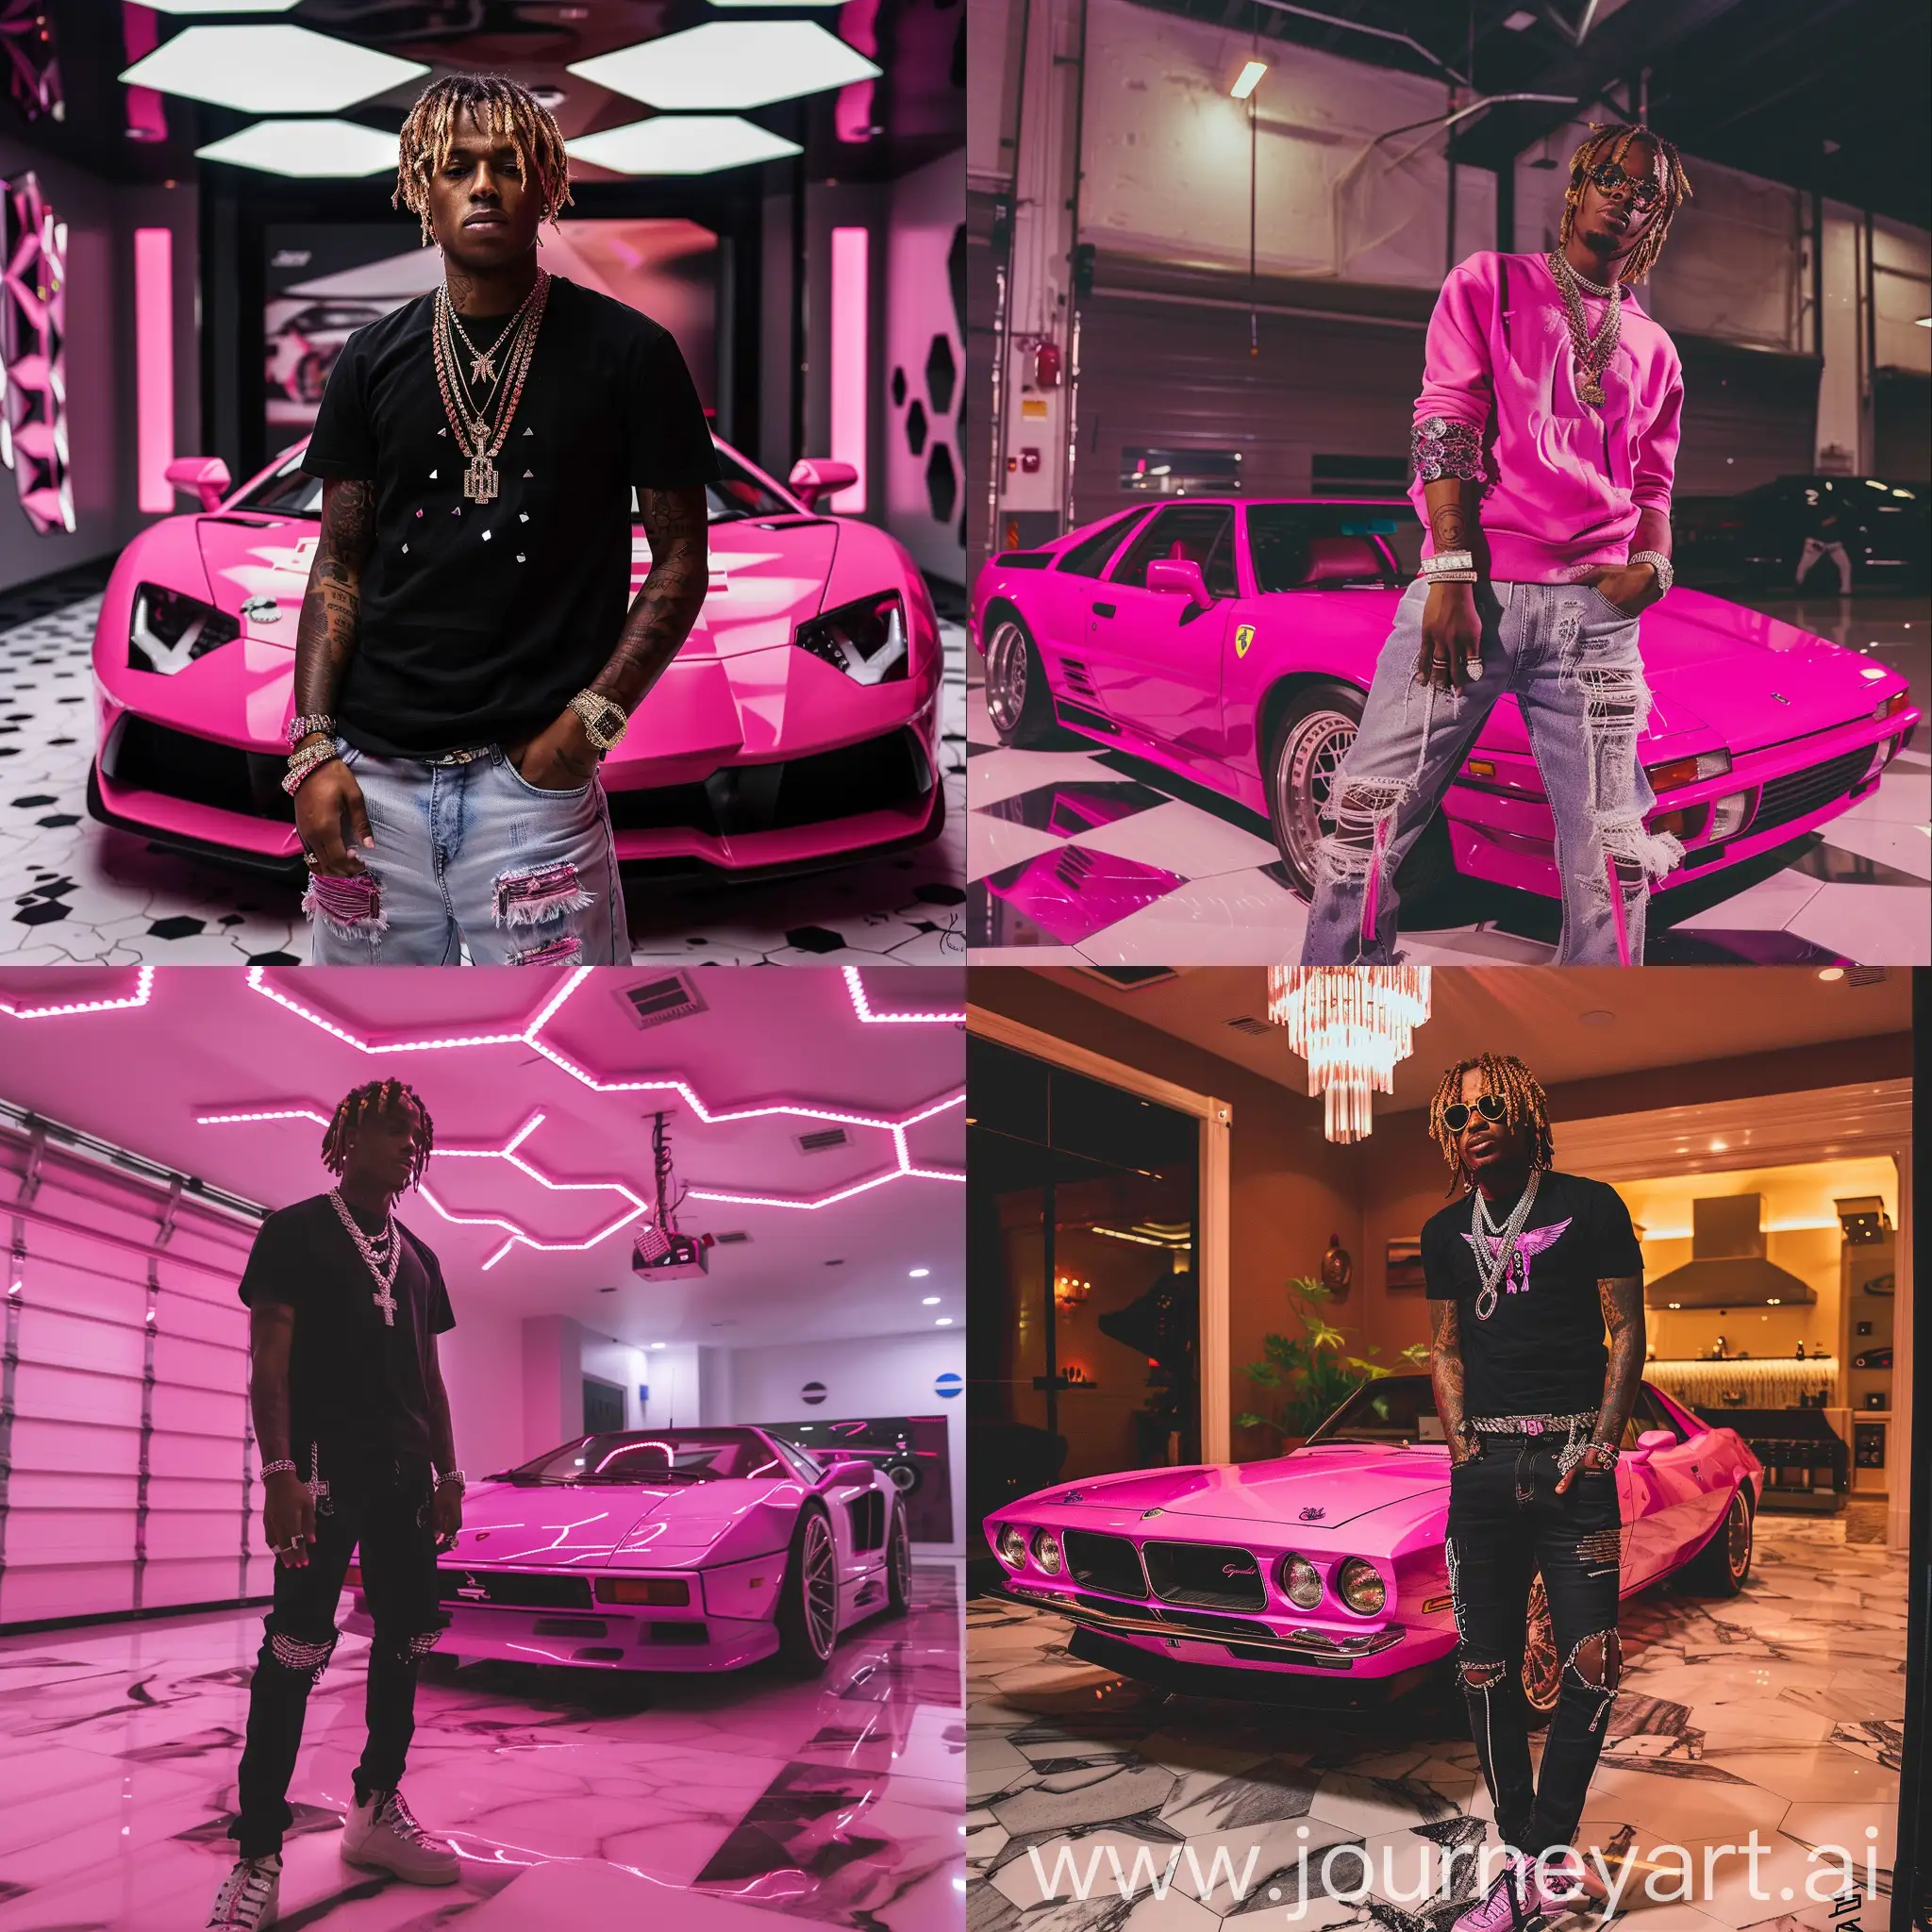 a photograph of juice wrld wearing a nlack shirt and sagging jeans and diamond jewelry,showing off a 1968 bubble gum pink lamborgini espada in a expensive garage with marble floor and hexagon lights